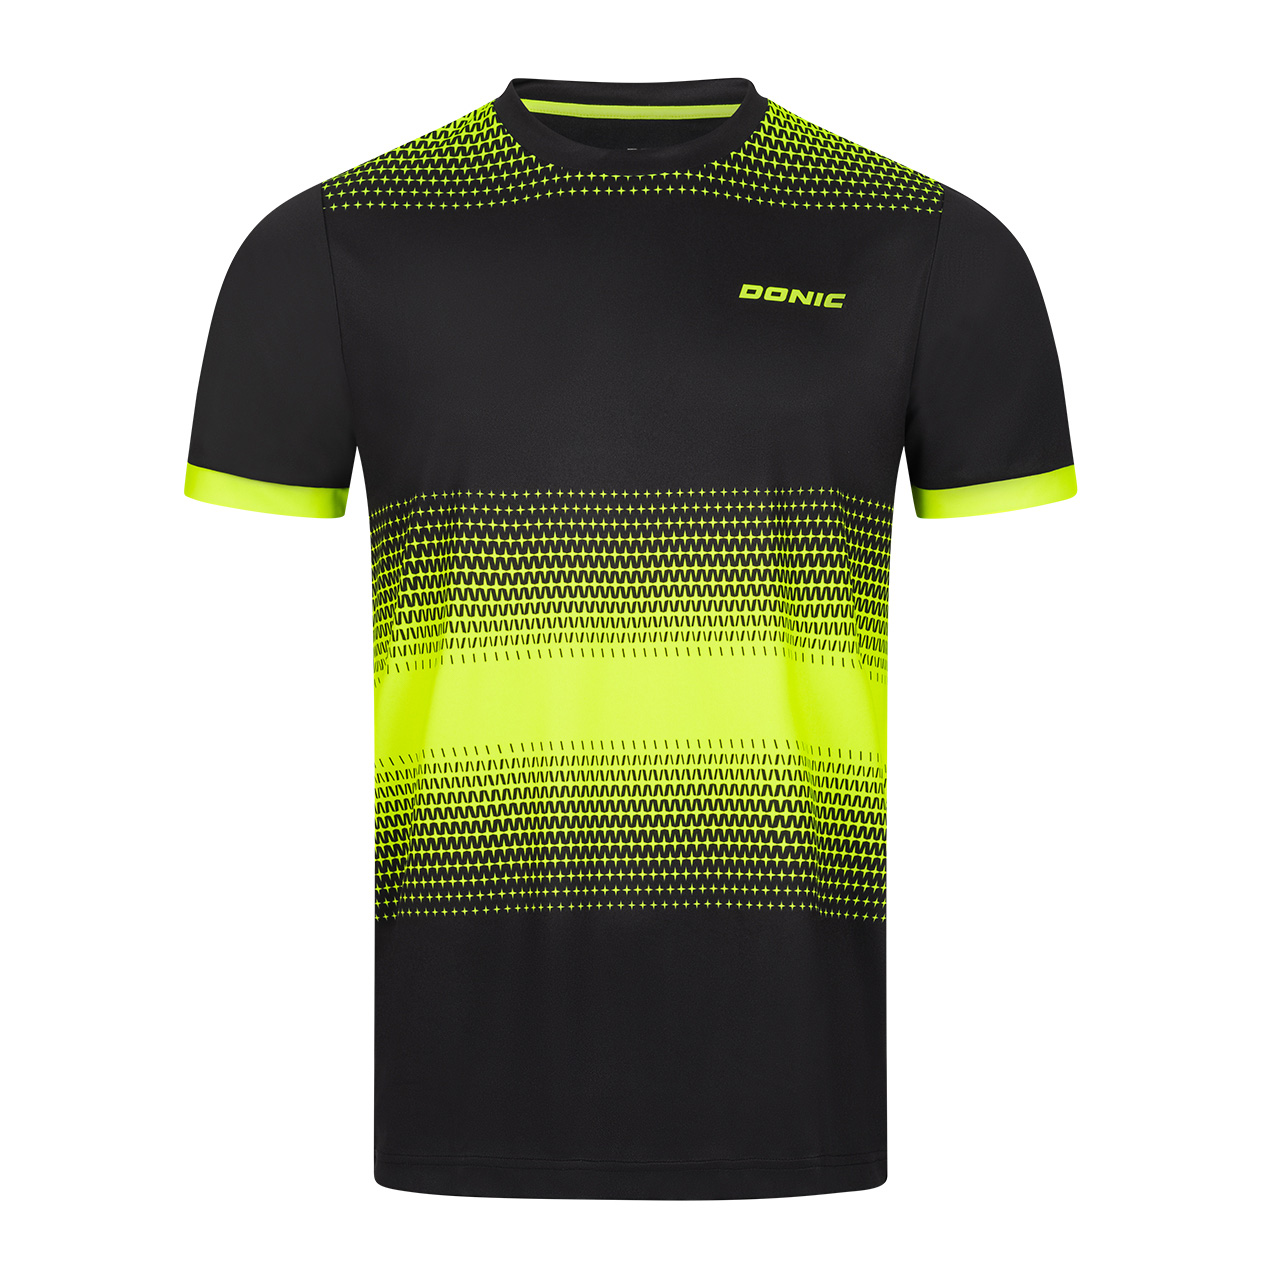 Donic Shirt Bound Black/Yellow - Jarvis Sports | Table Tennis